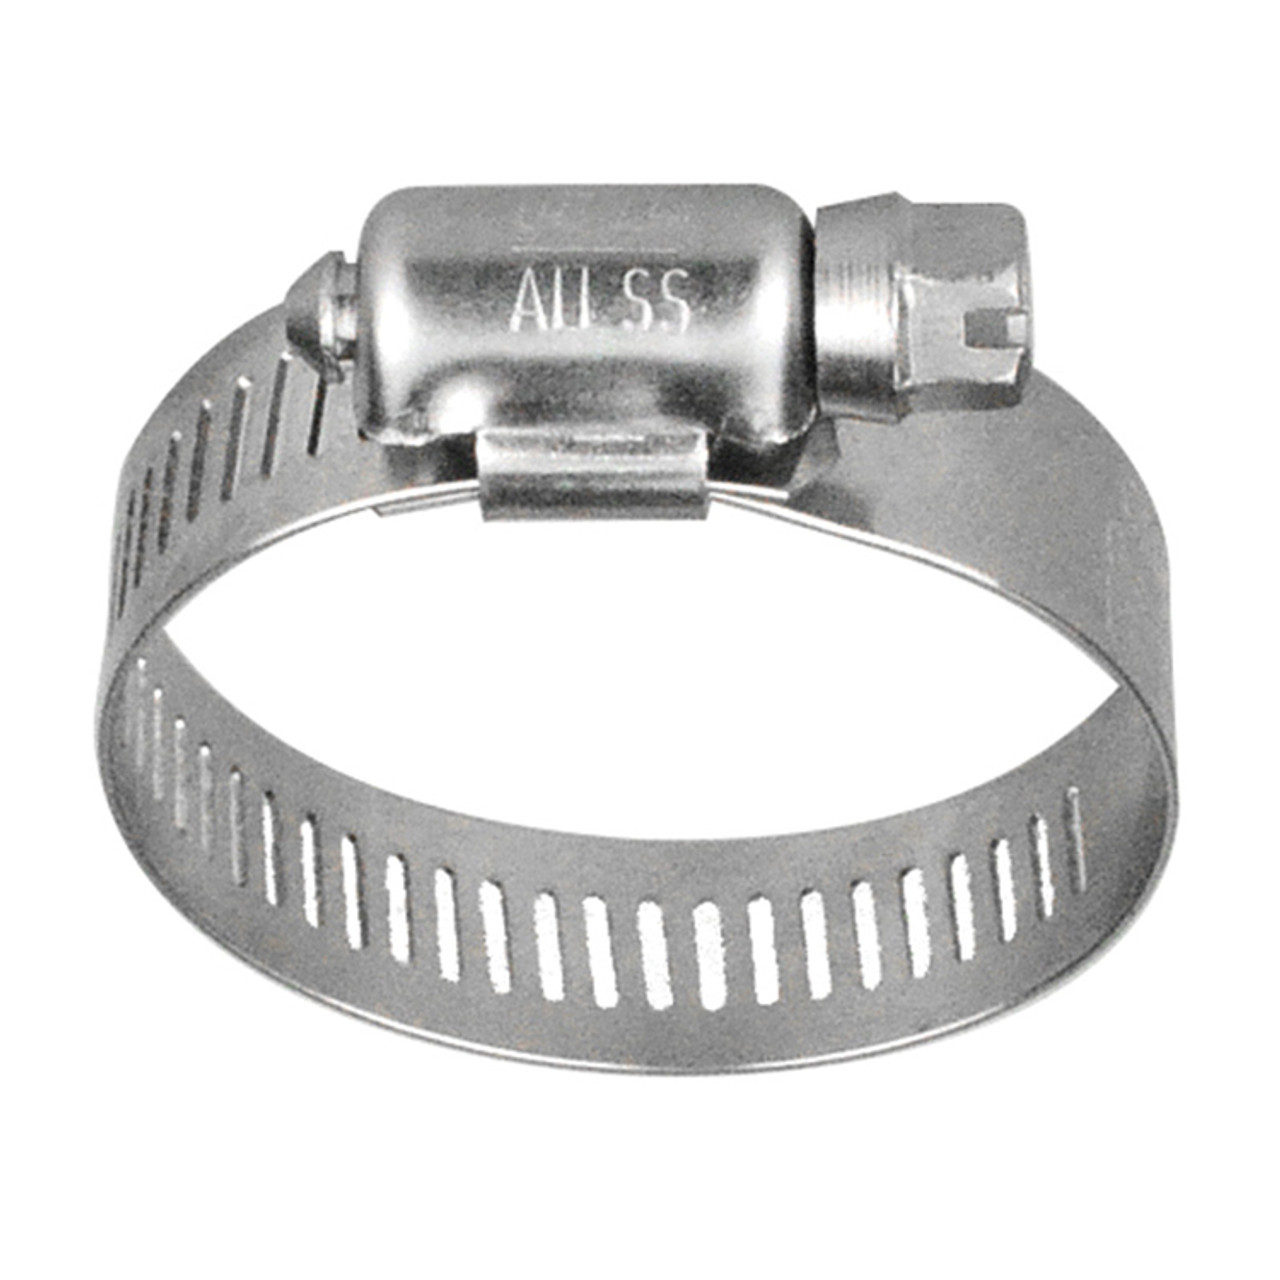 11-3/4" Stainless Steel Worm Gear Hose Clamp   G8-188